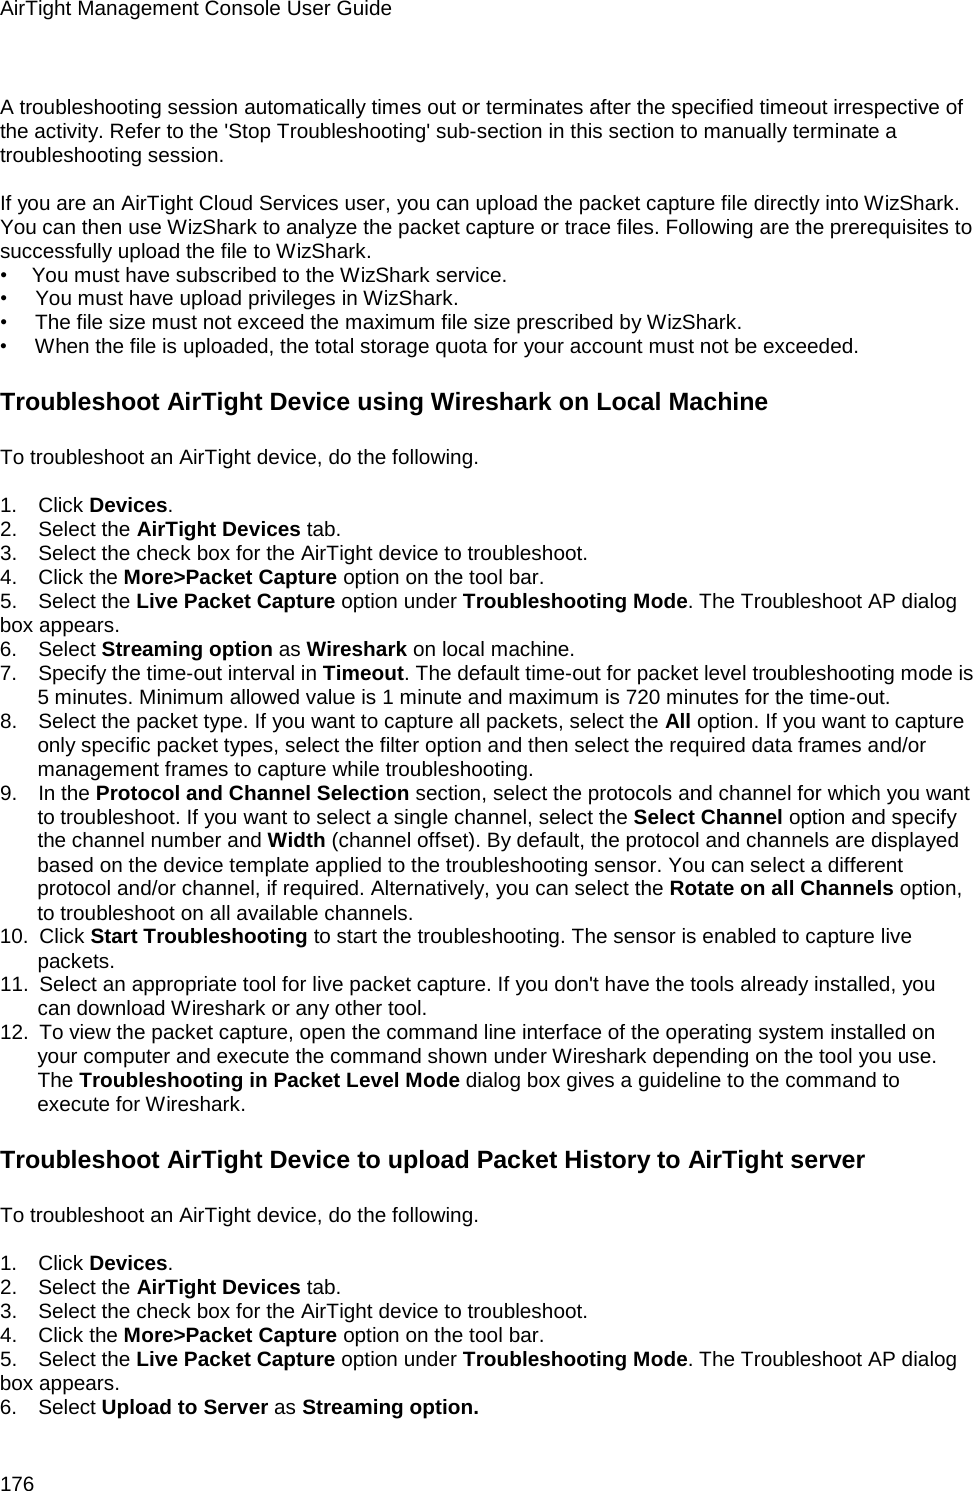 AirTight Management Console User Guide 176   A troubleshooting session automatically times out or terminates after the specified timeout irrespective of the activity. Refer to the &apos;Stop Troubleshooting&apos; sub-section in this section to manually terminate a troubleshooting session.   If you are an AirTight Cloud Services user, you can upload the packet capture file directly into WizShark. You can then use WizShark to analyze the packet capture or trace files. Following are the prerequisites to successfully upload the file to WizShark. •       You must have subscribed to the WizShark service. •        You must have upload privileges in WizShark. •        The file size must not exceed the maximum file size prescribed by WizShark. •        When the file is uploaded, the total storage quota for your account must not be exceeded. Troubleshoot AirTight Device using Wireshark on Local Machine To troubleshoot an AirTight device, do the following.   1.      Click Devices. 2.      Select the AirTight Devices tab. 3.      Select the check box for the AirTight device to troubleshoot. 4.      Click the More&gt;Packet Capture option on the tool bar. 5.      Select the Live Packet Capture option under Troubleshooting Mode. The Troubleshoot AP dialog box appears. 6.      Select Streaming option as Wireshark on local machine. 7.      Specify the time-out interval in Timeout. The default time-out for packet level troubleshooting mode is 5 minutes. Minimum allowed value is 1 minute and maximum is 720 minutes for the time-out. 8.      Select the packet type. If you want to capture all packets, select the All option. If you want to capture only specific packet types, select the filter option and then select the required data frames and/or management frames to capture while troubleshooting. 9.      In the Protocol and Channel Selection section, select the protocols and channel for which you want to troubleshoot. If you want to select a single channel, select the Select Channel option and specify the channel number and Width (channel offset). By default, the protocol and channels are displayed based on the device template applied to the troubleshooting sensor. You can select a different protocol and/or channel, if required. Alternatively, you can select the Rotate on all Channels option, to troubleshoot on all available channels. 10.   Click Start Troubleshooting to start the troubleshooting. The sensor is enabled to capture live packets. 11.   Select an appropriate tool for live packet capture. If you don&apos;t have the tools already installed, you can download Wireshark or any other tool. 12.   To view the packet capture, open the command line interface of the operating system installed on your computer and execute the command shown under Wireshark depending on the tool you use. The Troubleshooting in Packet Level Mode dialog box gives a guideline to the command to execute for Wireshark.  Troubleshoot AirTight Device to upload Packet History to AirTight server To troubleshoot an AirTight device, do the following.   1.      Click Devices. 2.      Select the AirTight Devices tab. 3.      Select the check box for the AirTight device to troubleshoot. 4.      Click the More&gt;Packet Capture option on the tool bar. 5.      Select the Live Packet Capture option under Troubleshooting Mode. The Troubleshoot AP dialog box appears. 6.      Select Upload to Server as Streaming option. 